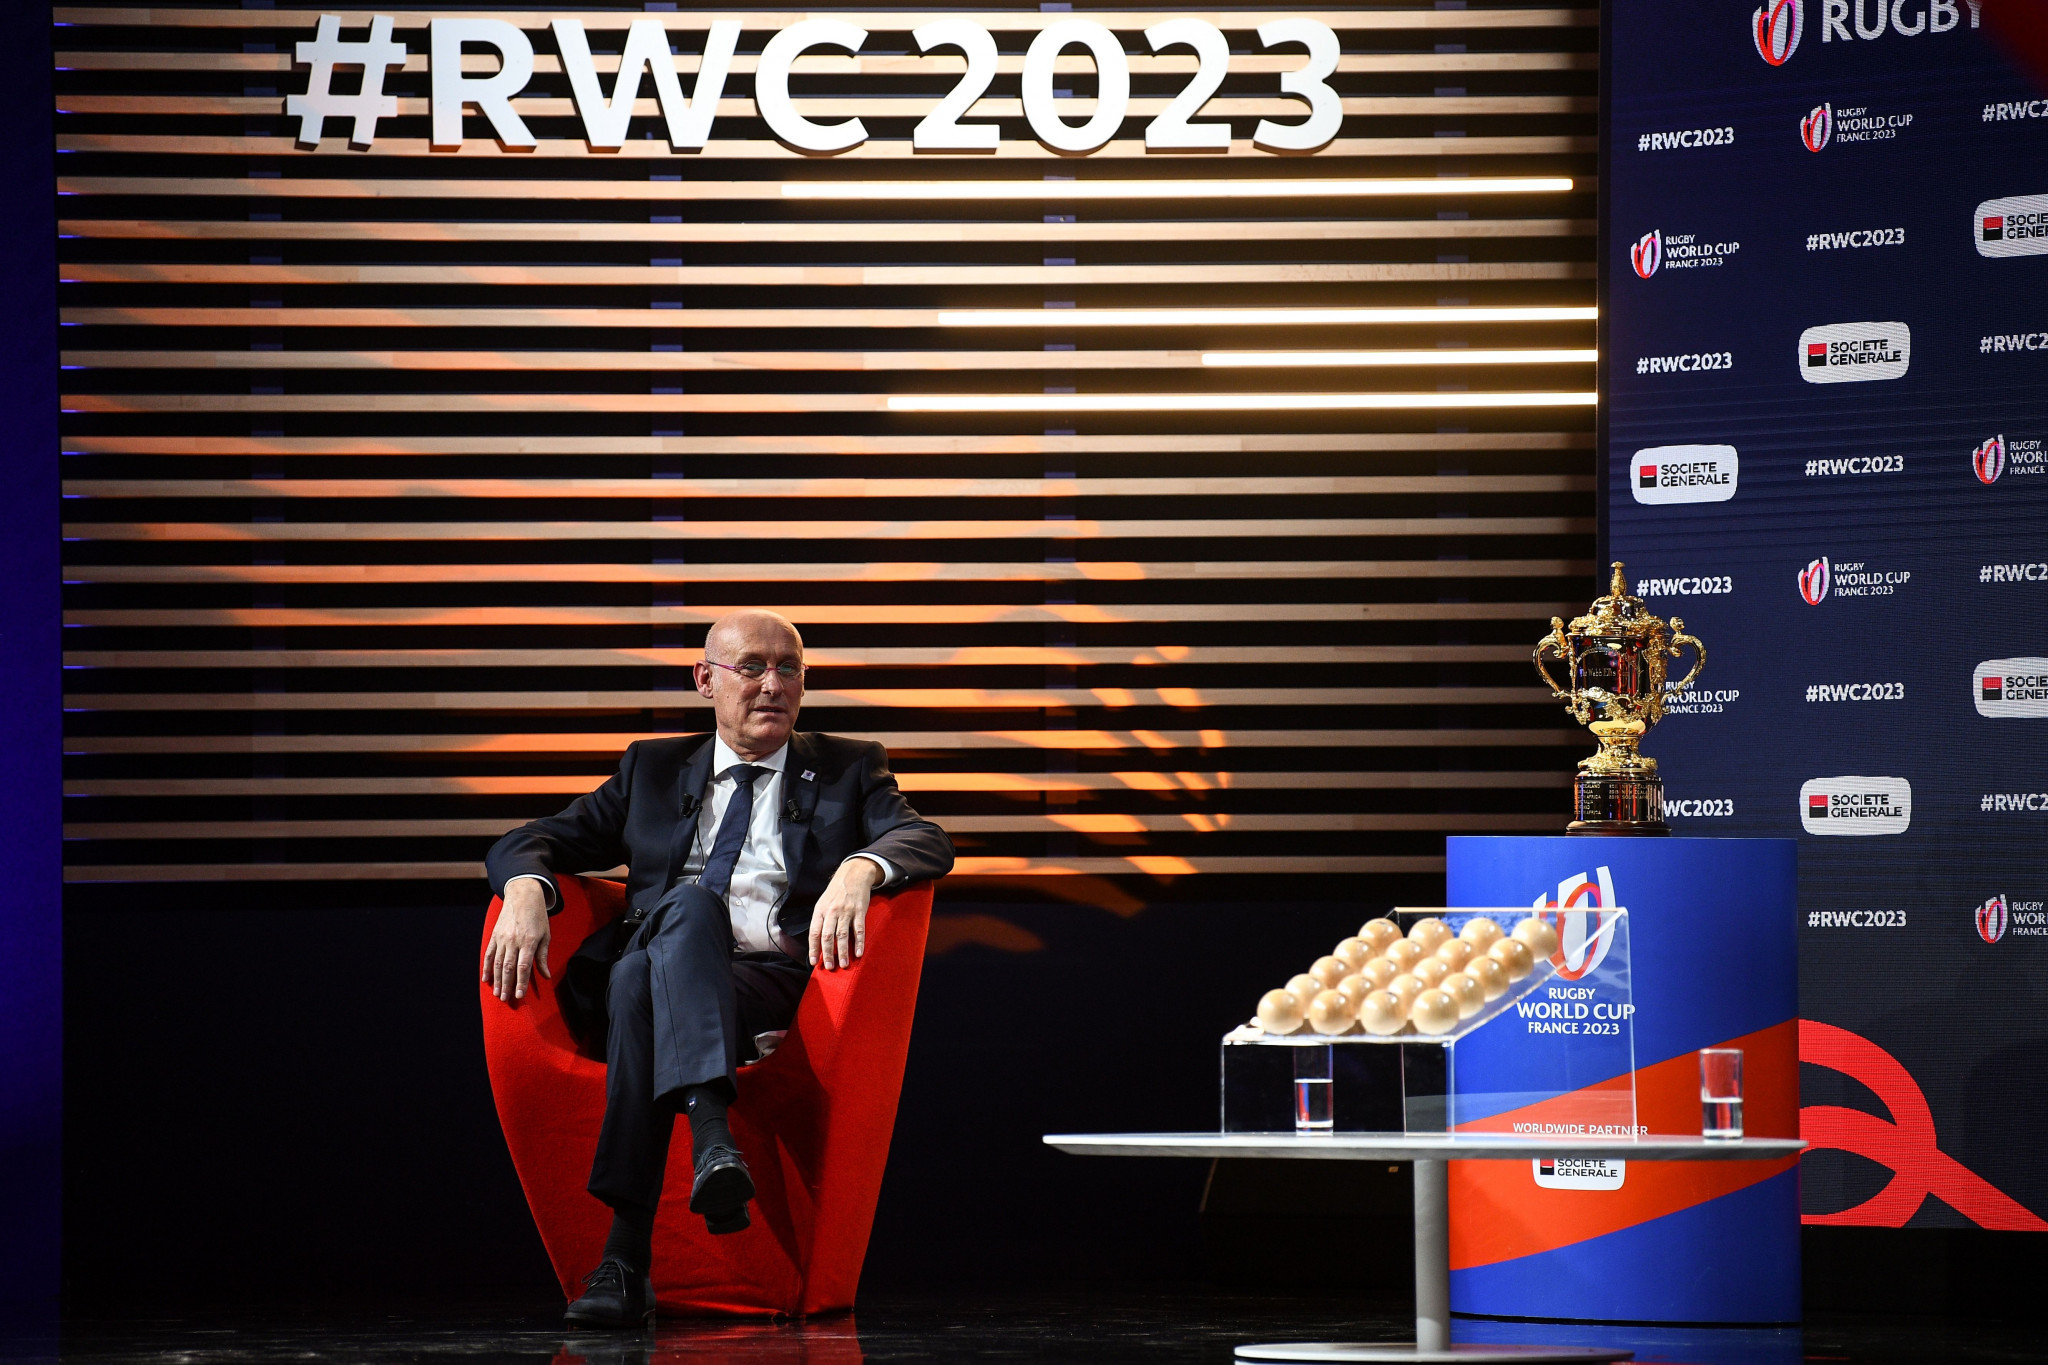 Bernard Laporte has marred France's hosting of the Rugby World Cup 2023 following his corruption scandal ©Getty Images